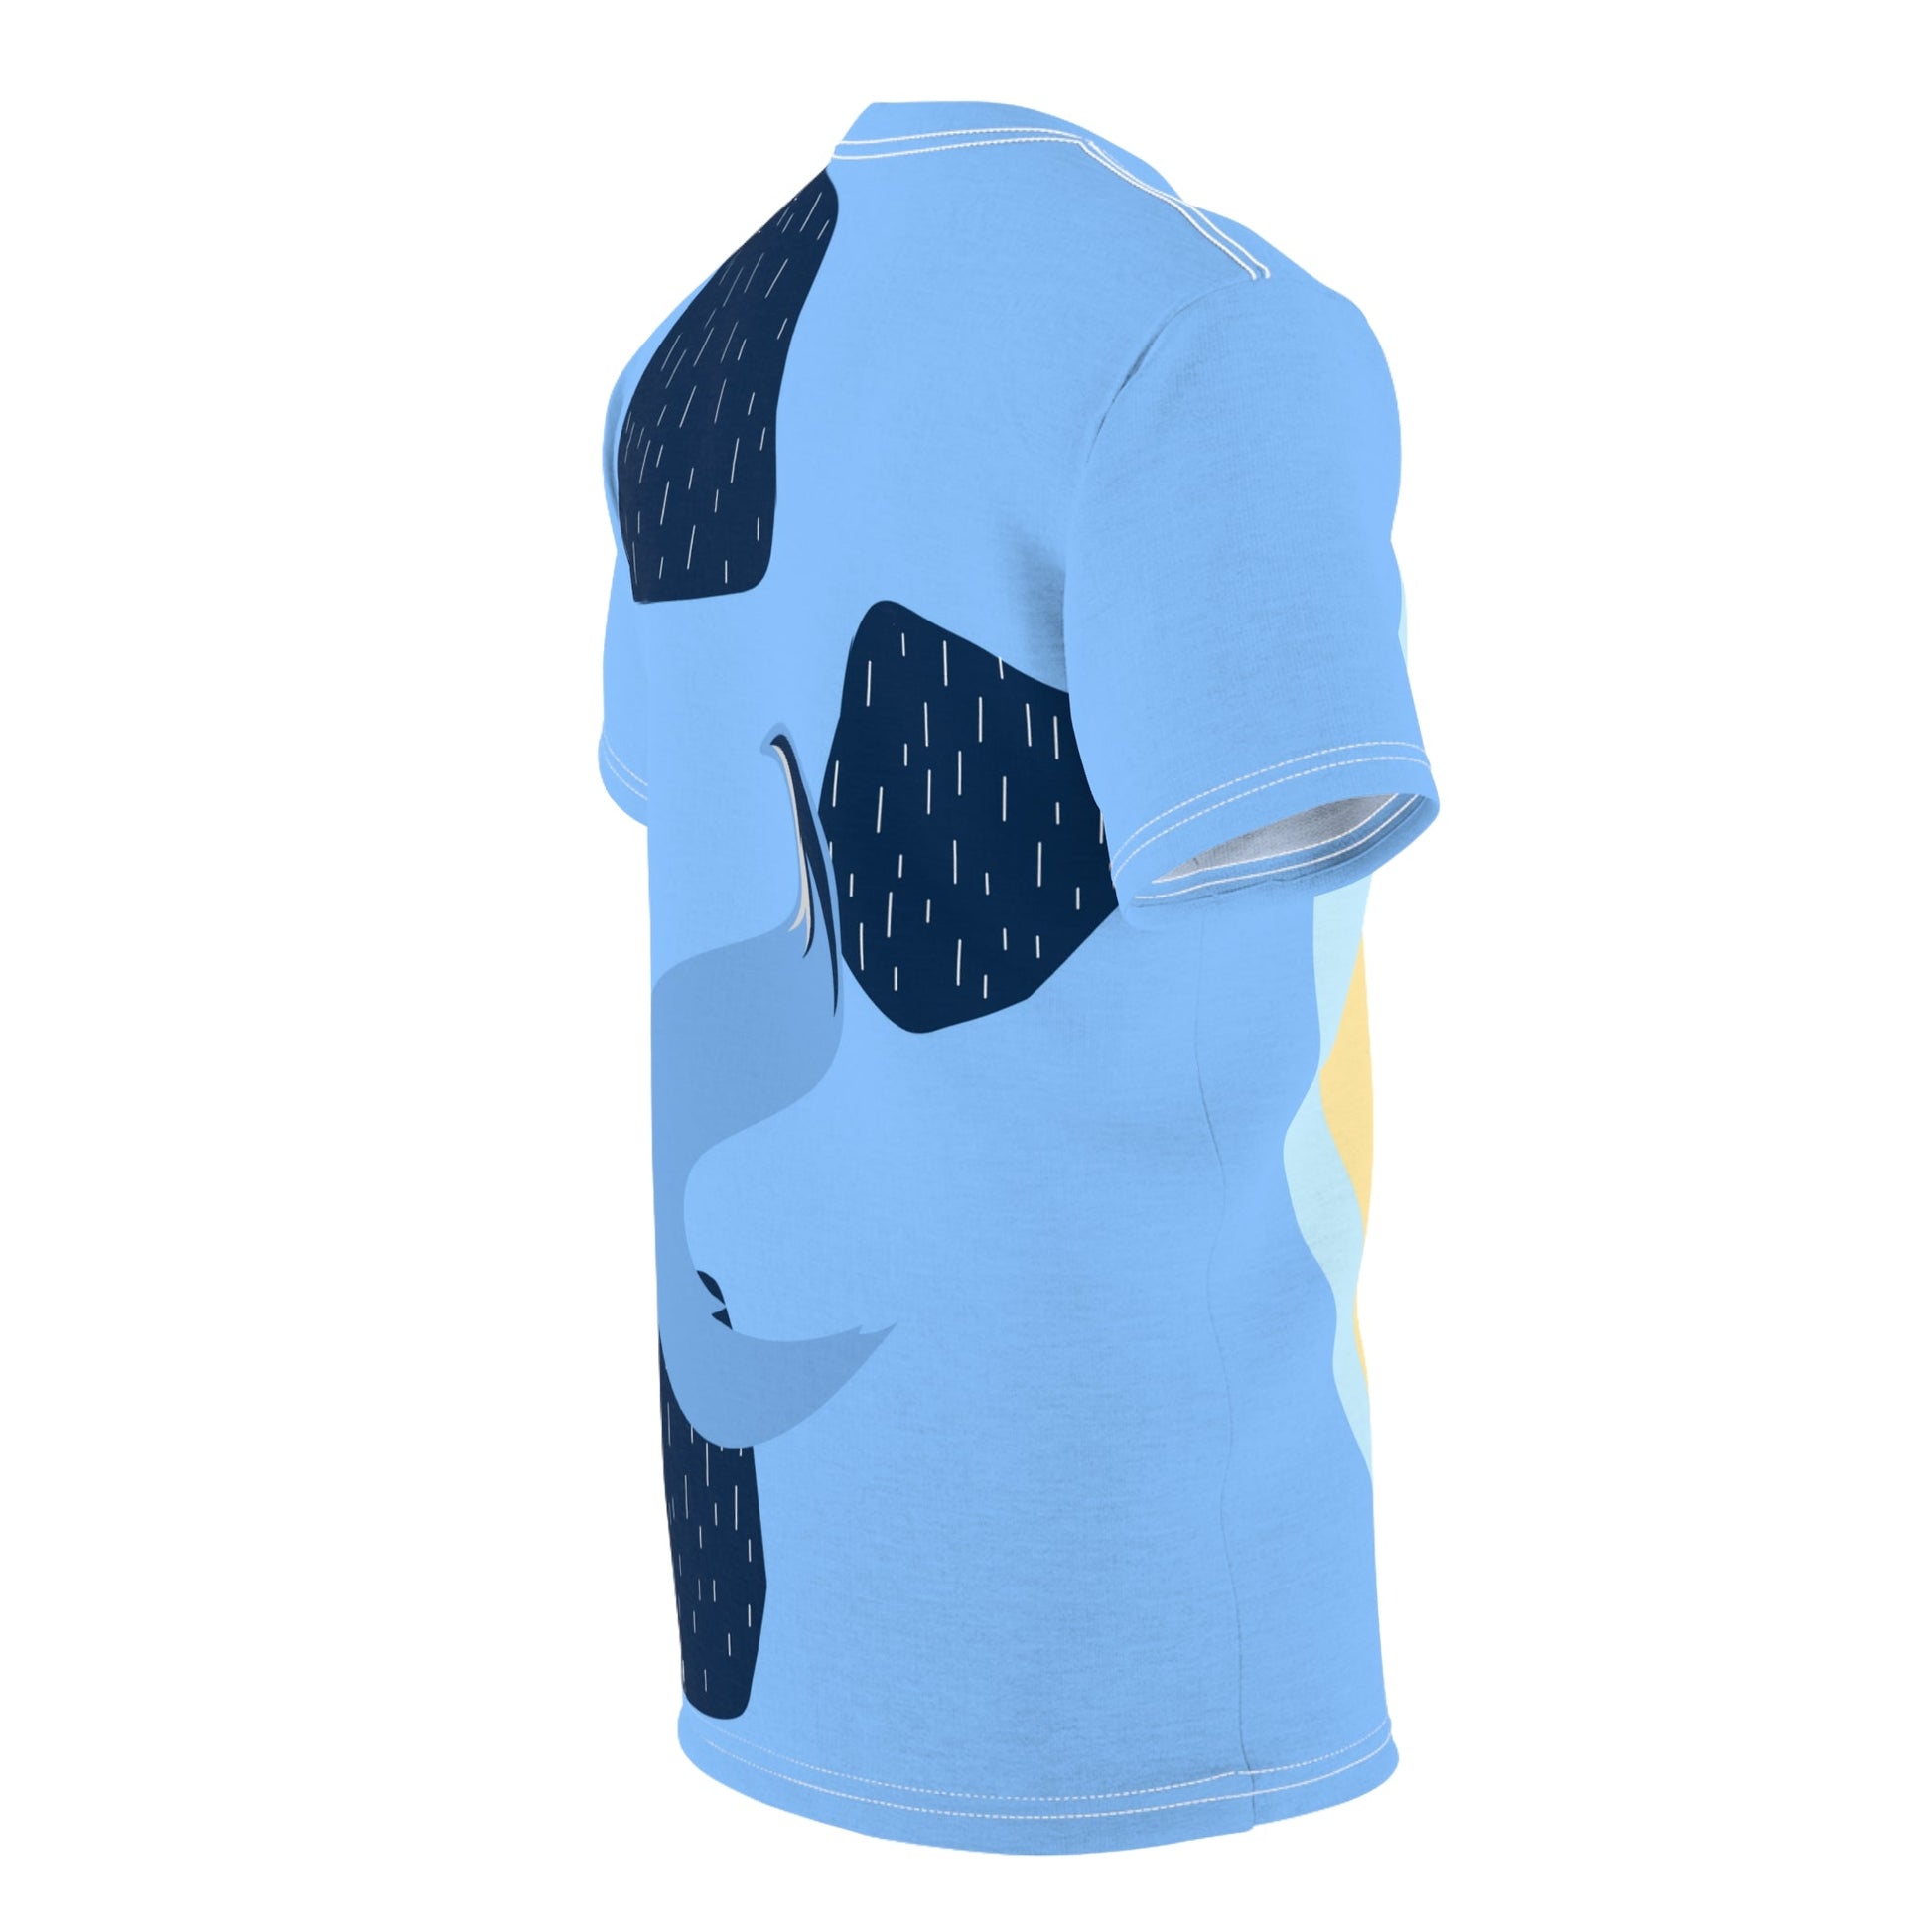 Blue Dog Unisex Tee- Costume, Cosplay, Bounding All Over PrintAOP ClothingAssembled in the USA#tag4##tag5##tag6#